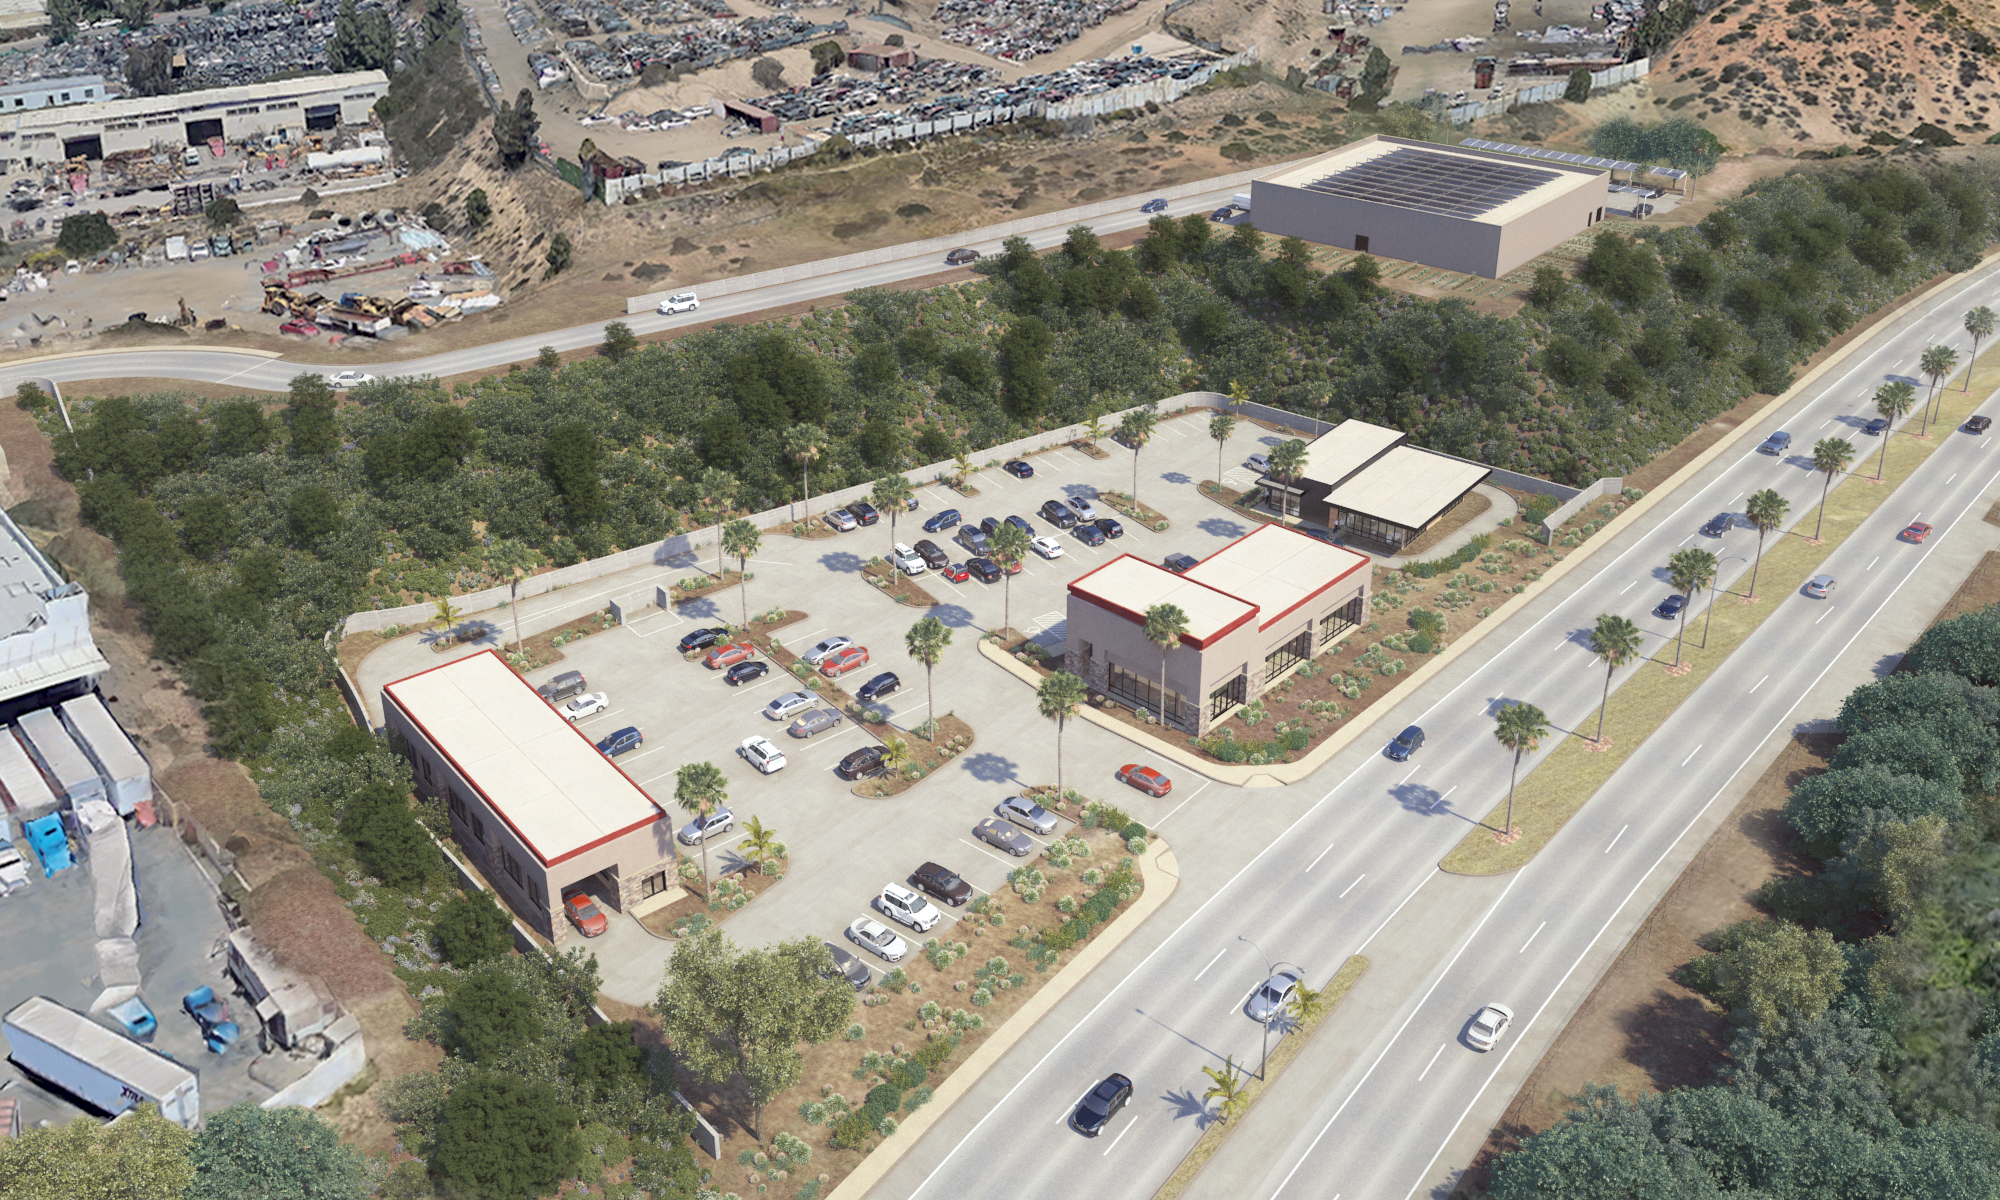  Multi-use Development with a Retail Storefront, Industrial Building, and various Retail or Service uses. 